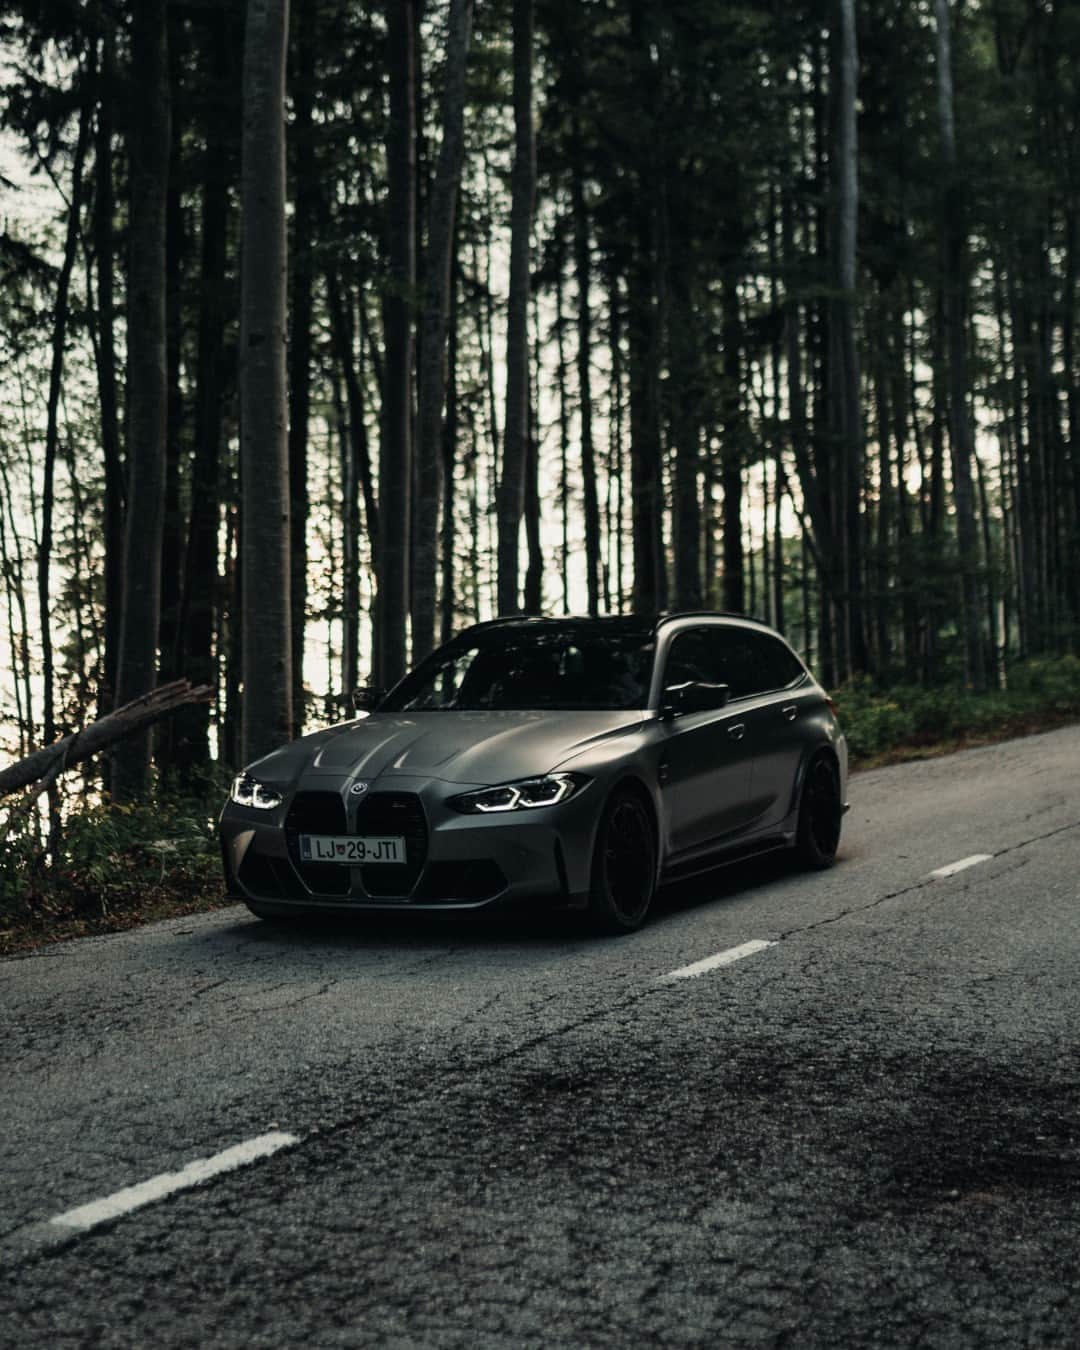 BMWのインスタグラム：「Roaming the woods, where performance meets serenity 🏁 📸: @klemen_jeram @bmwslovenija #BMWRepost   The BMW M3 Competition xDrive Touring. #THEM3 #BMWM #M3 #M3Touring #BMW #MPower __ BMW M3 Competition xDrive Touring: Combined fuel consumption: 10.4–10.1 l/100 km. Combined CO2 emissions: 235–229 g/km. All data according to WLTP. Further info: www.bmw.com/disclaimer」